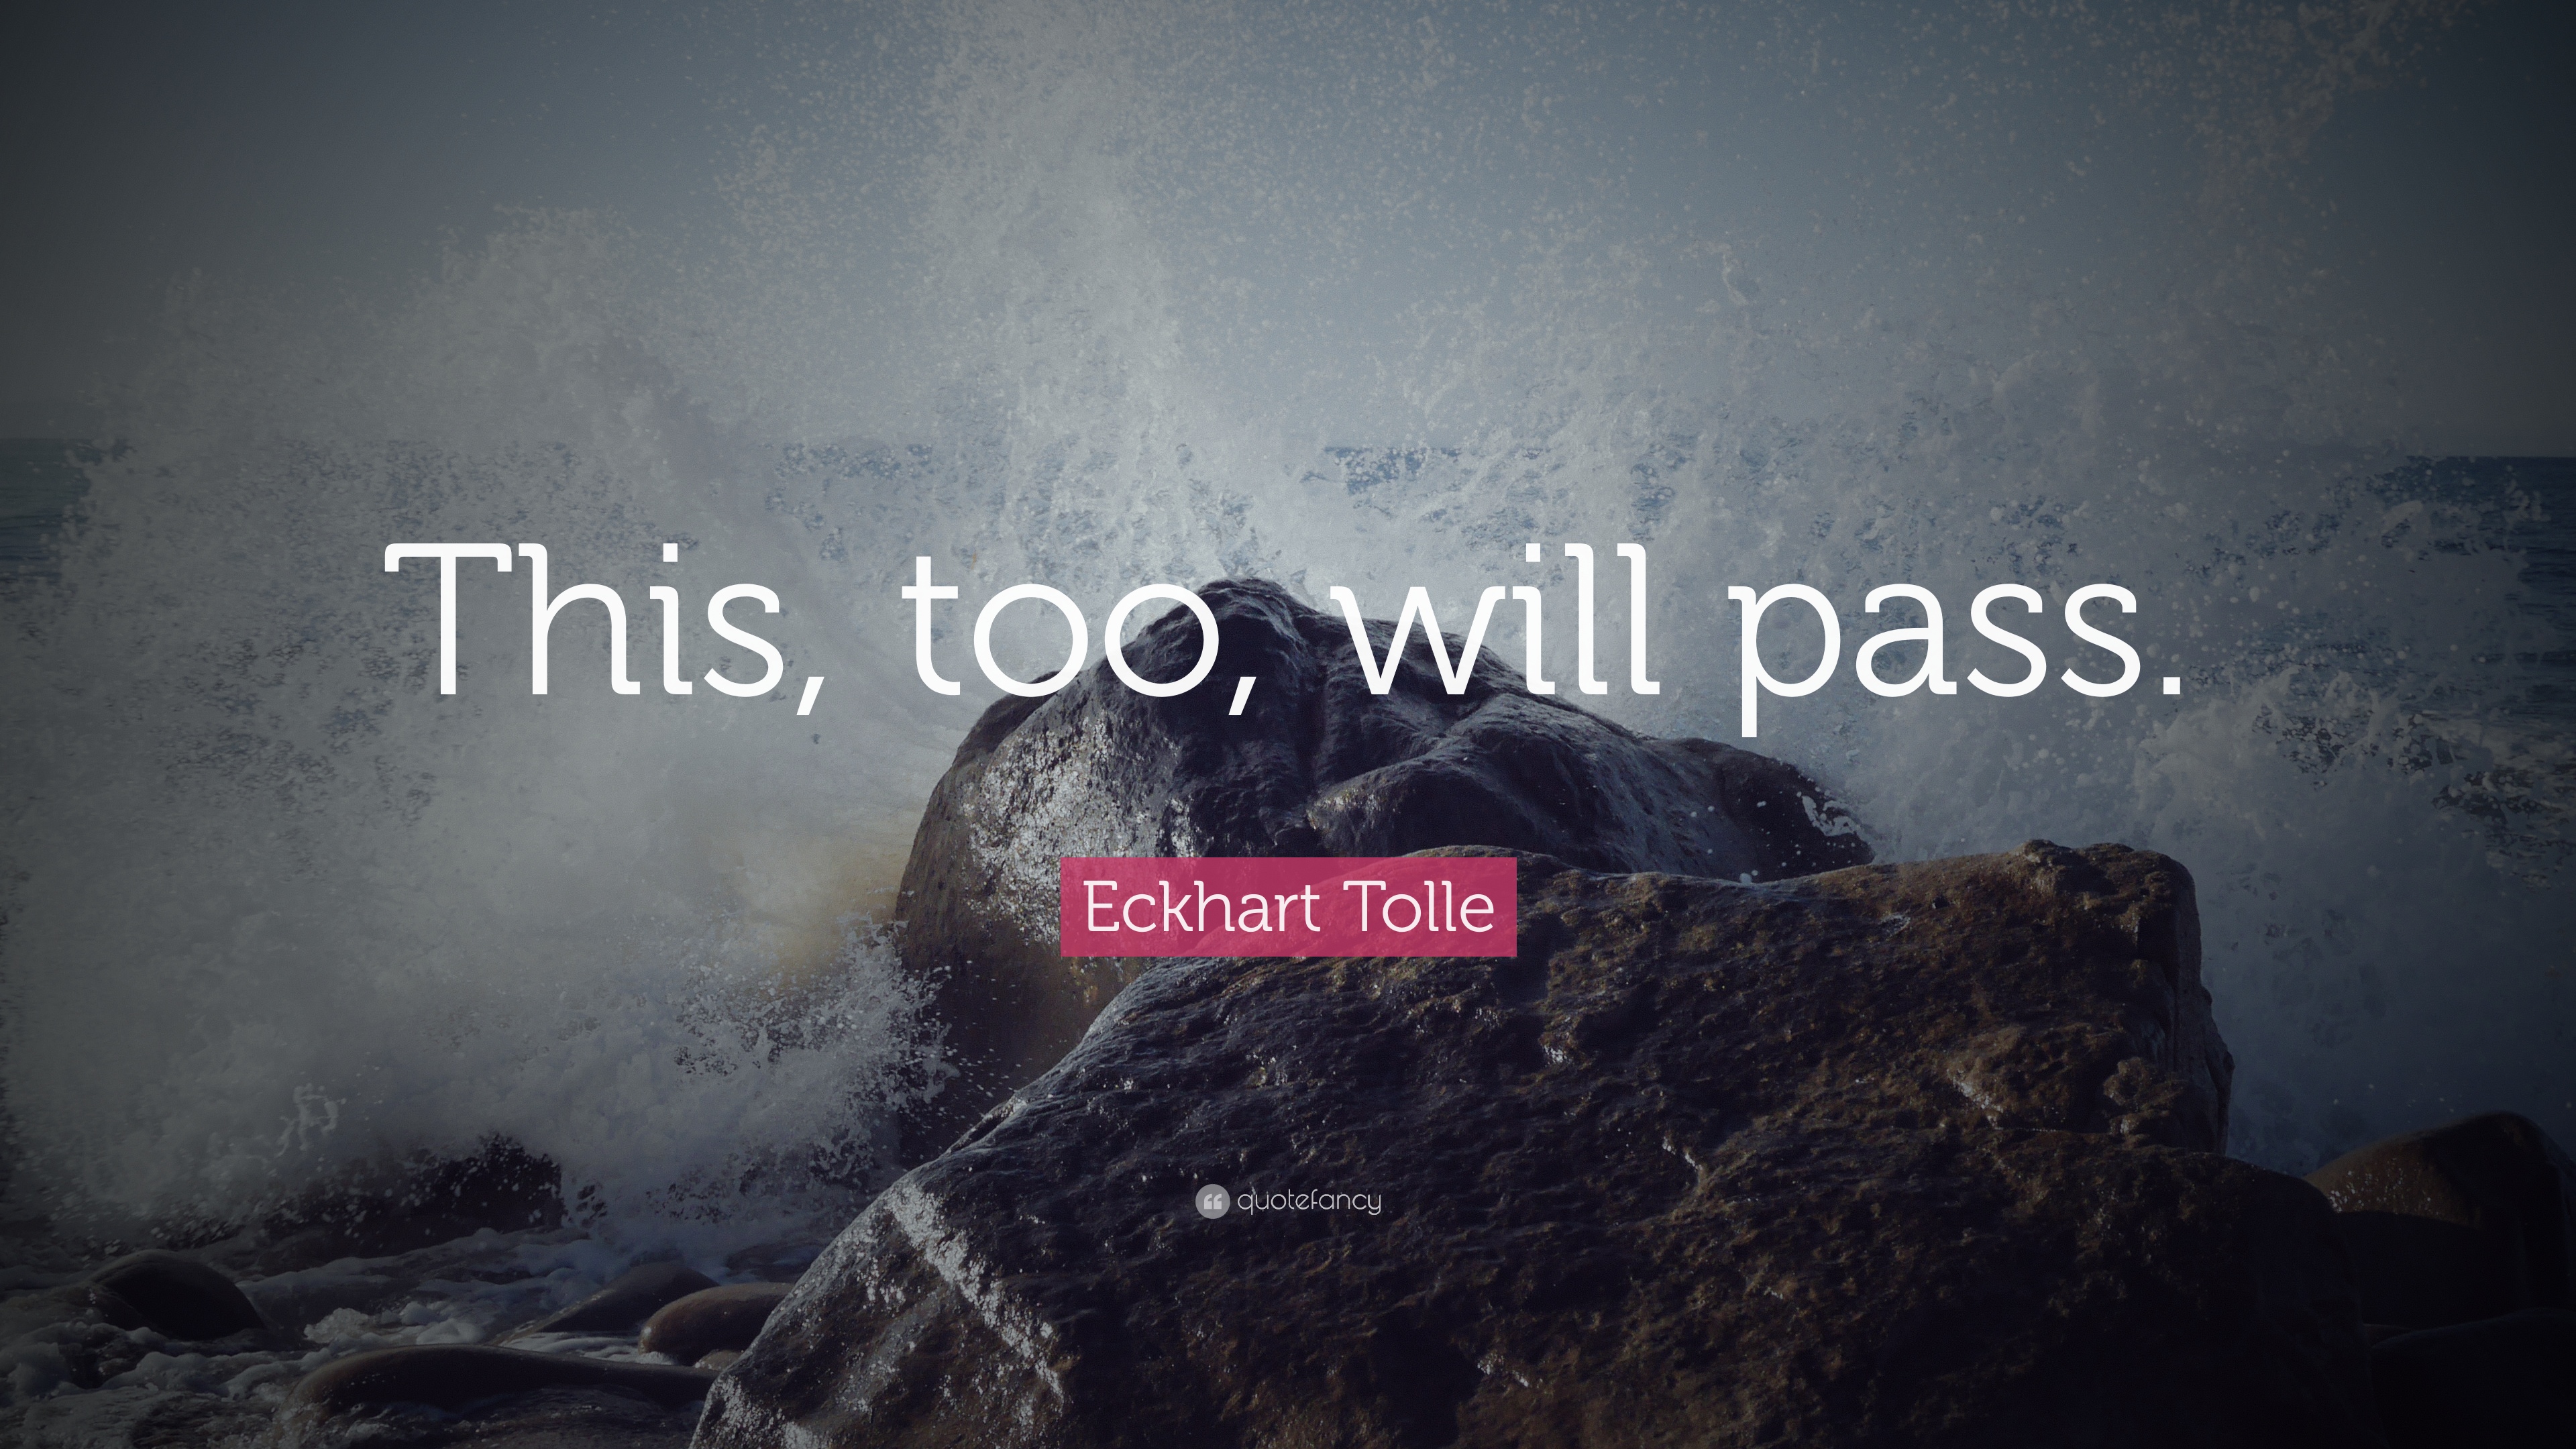 Eckhart Tolle Quote: “This, too, will pass.”